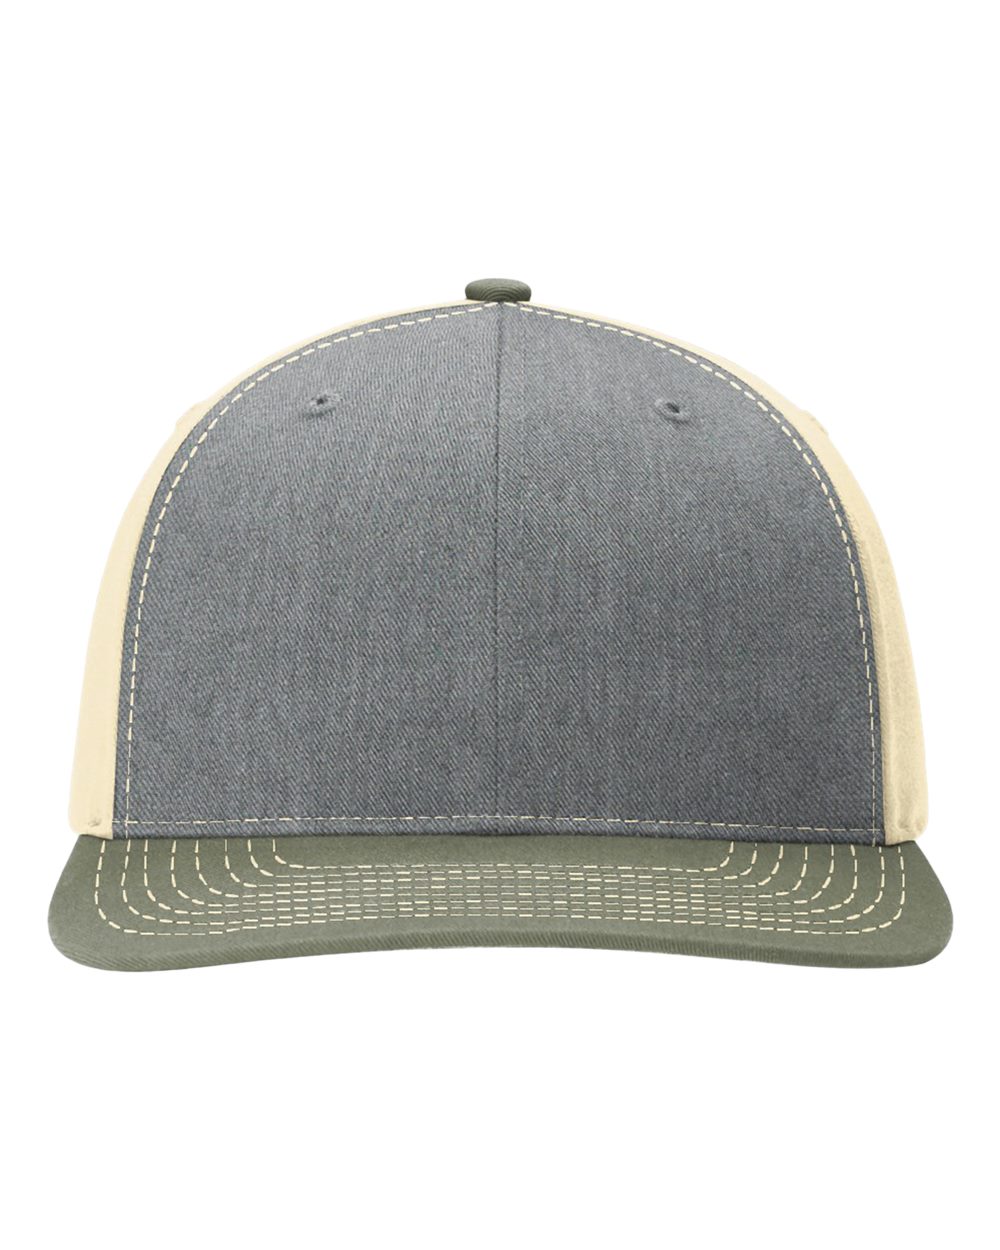 click to view Heather Grey/ Birch/ Loden